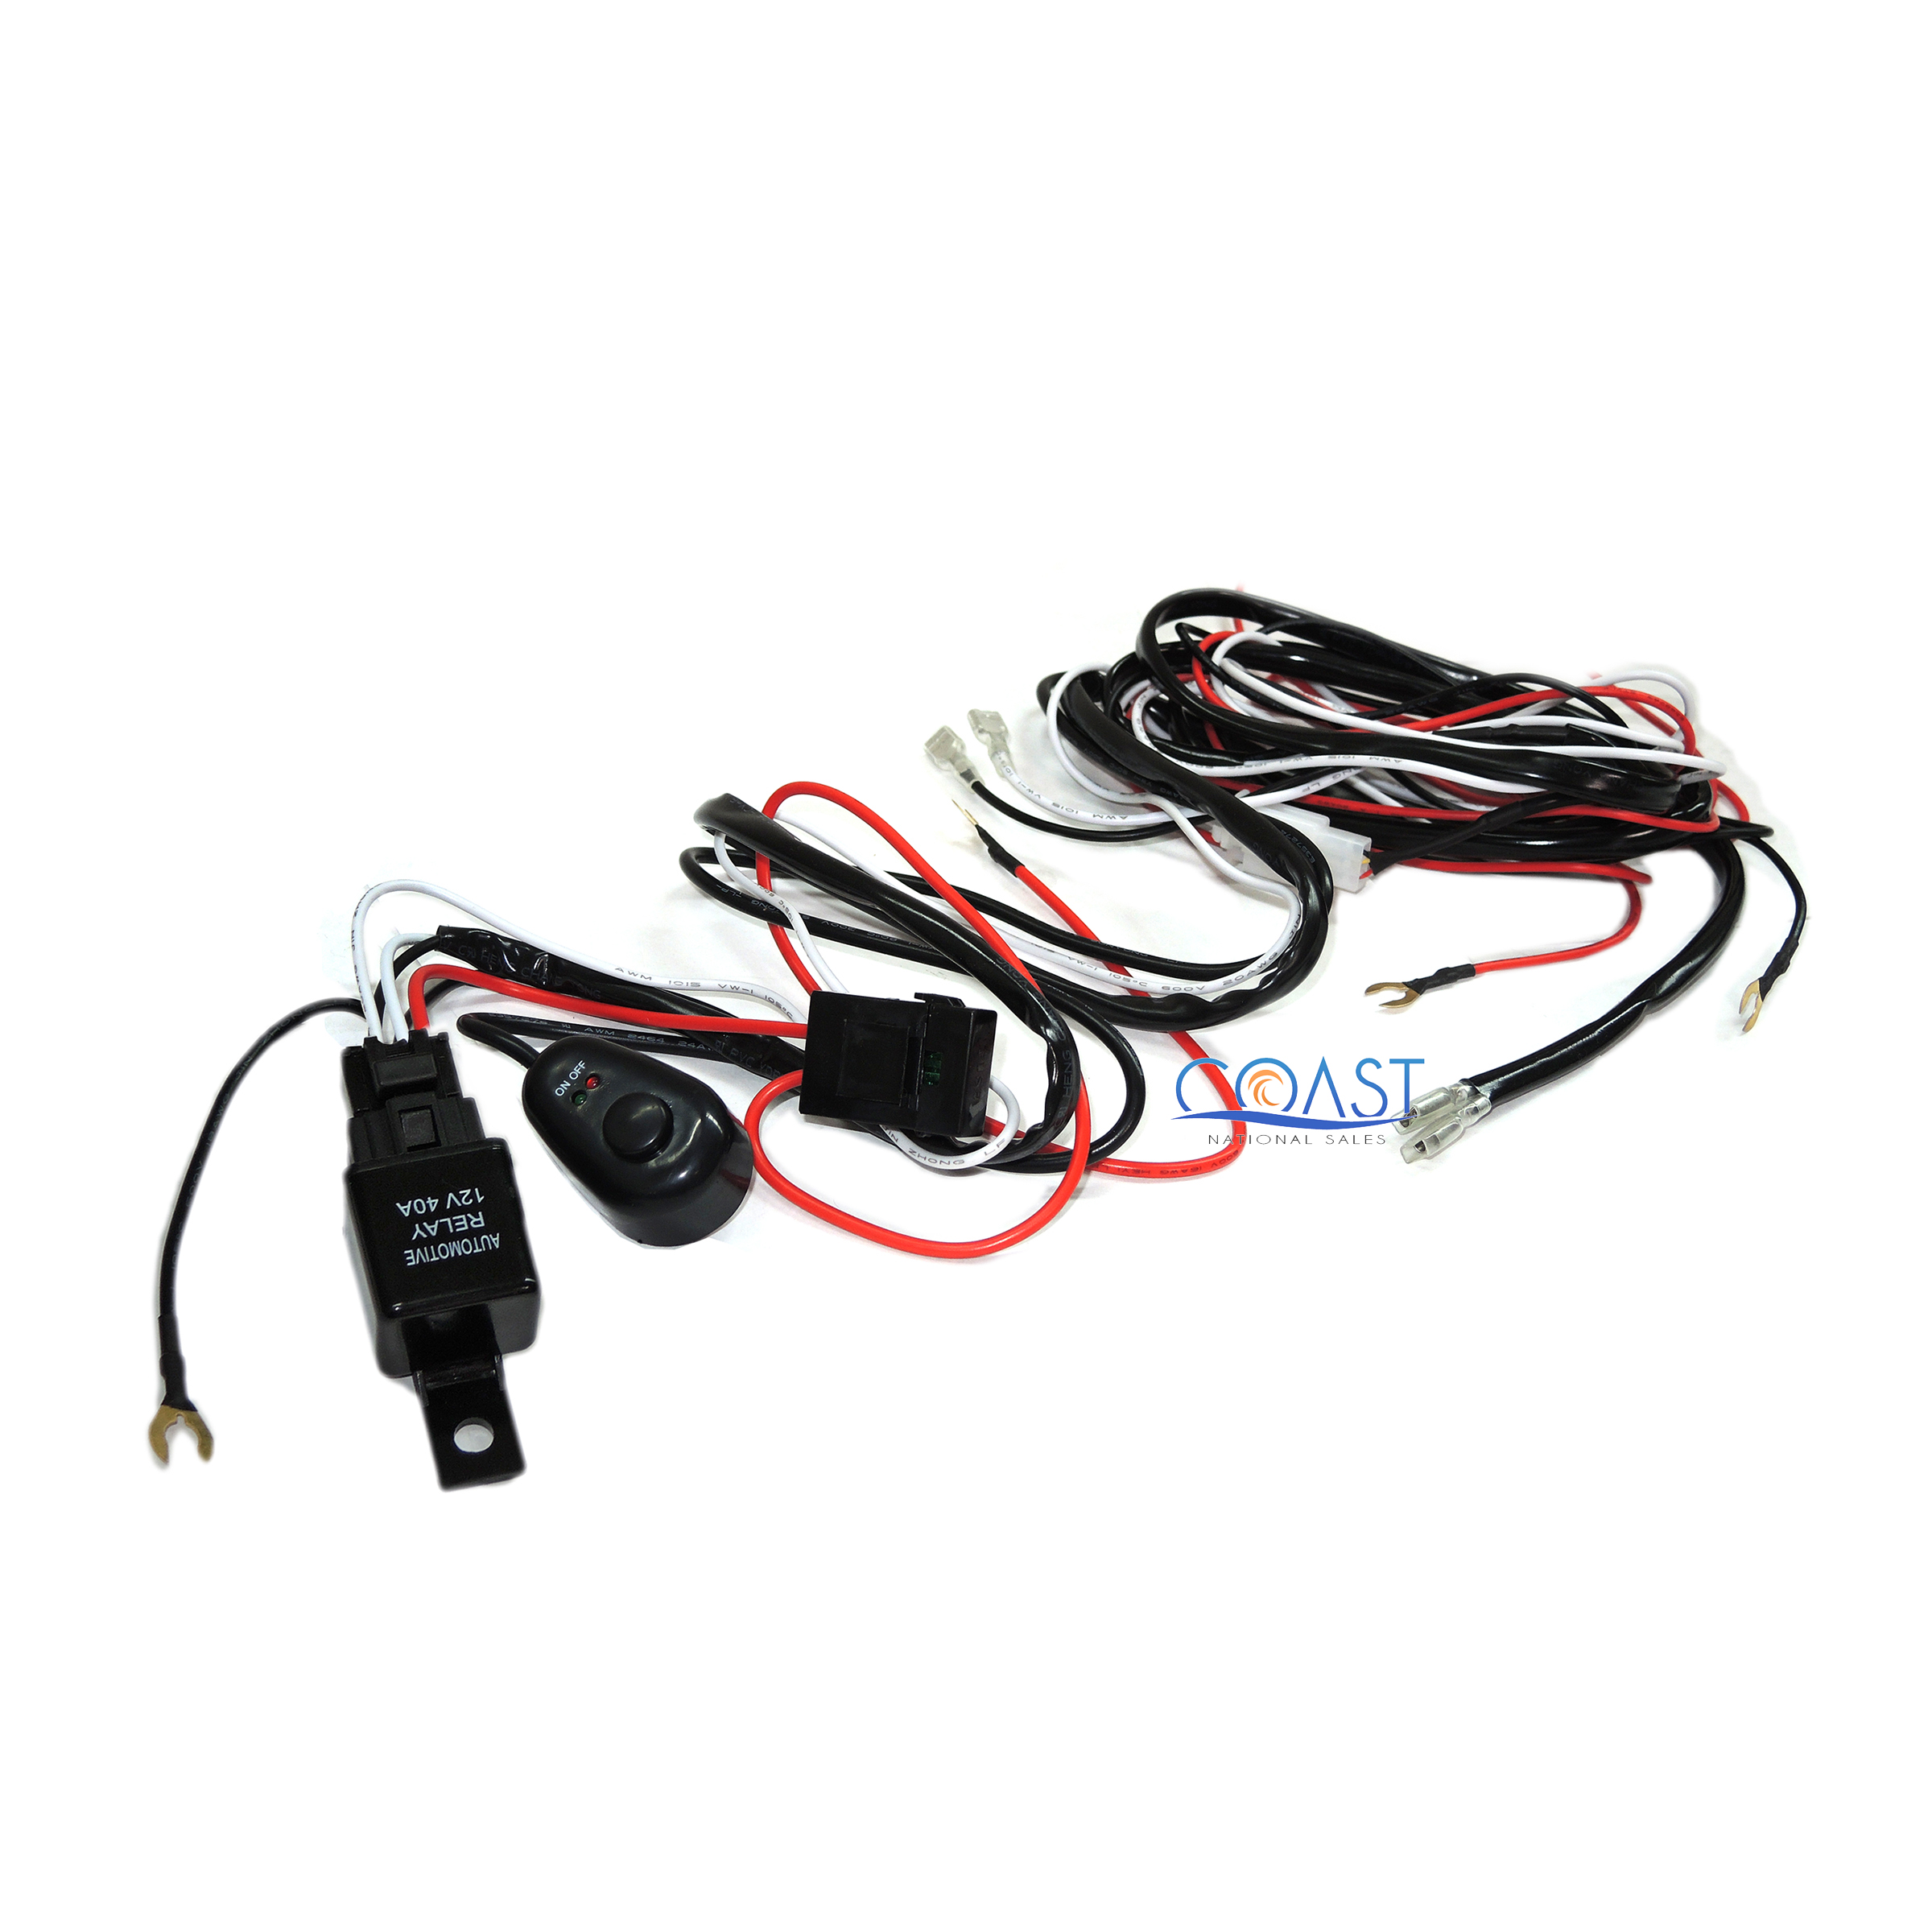 30A Wiring Loom For LED Light Bar Spot Lights 40A Relay Fuse Switch plug /& play